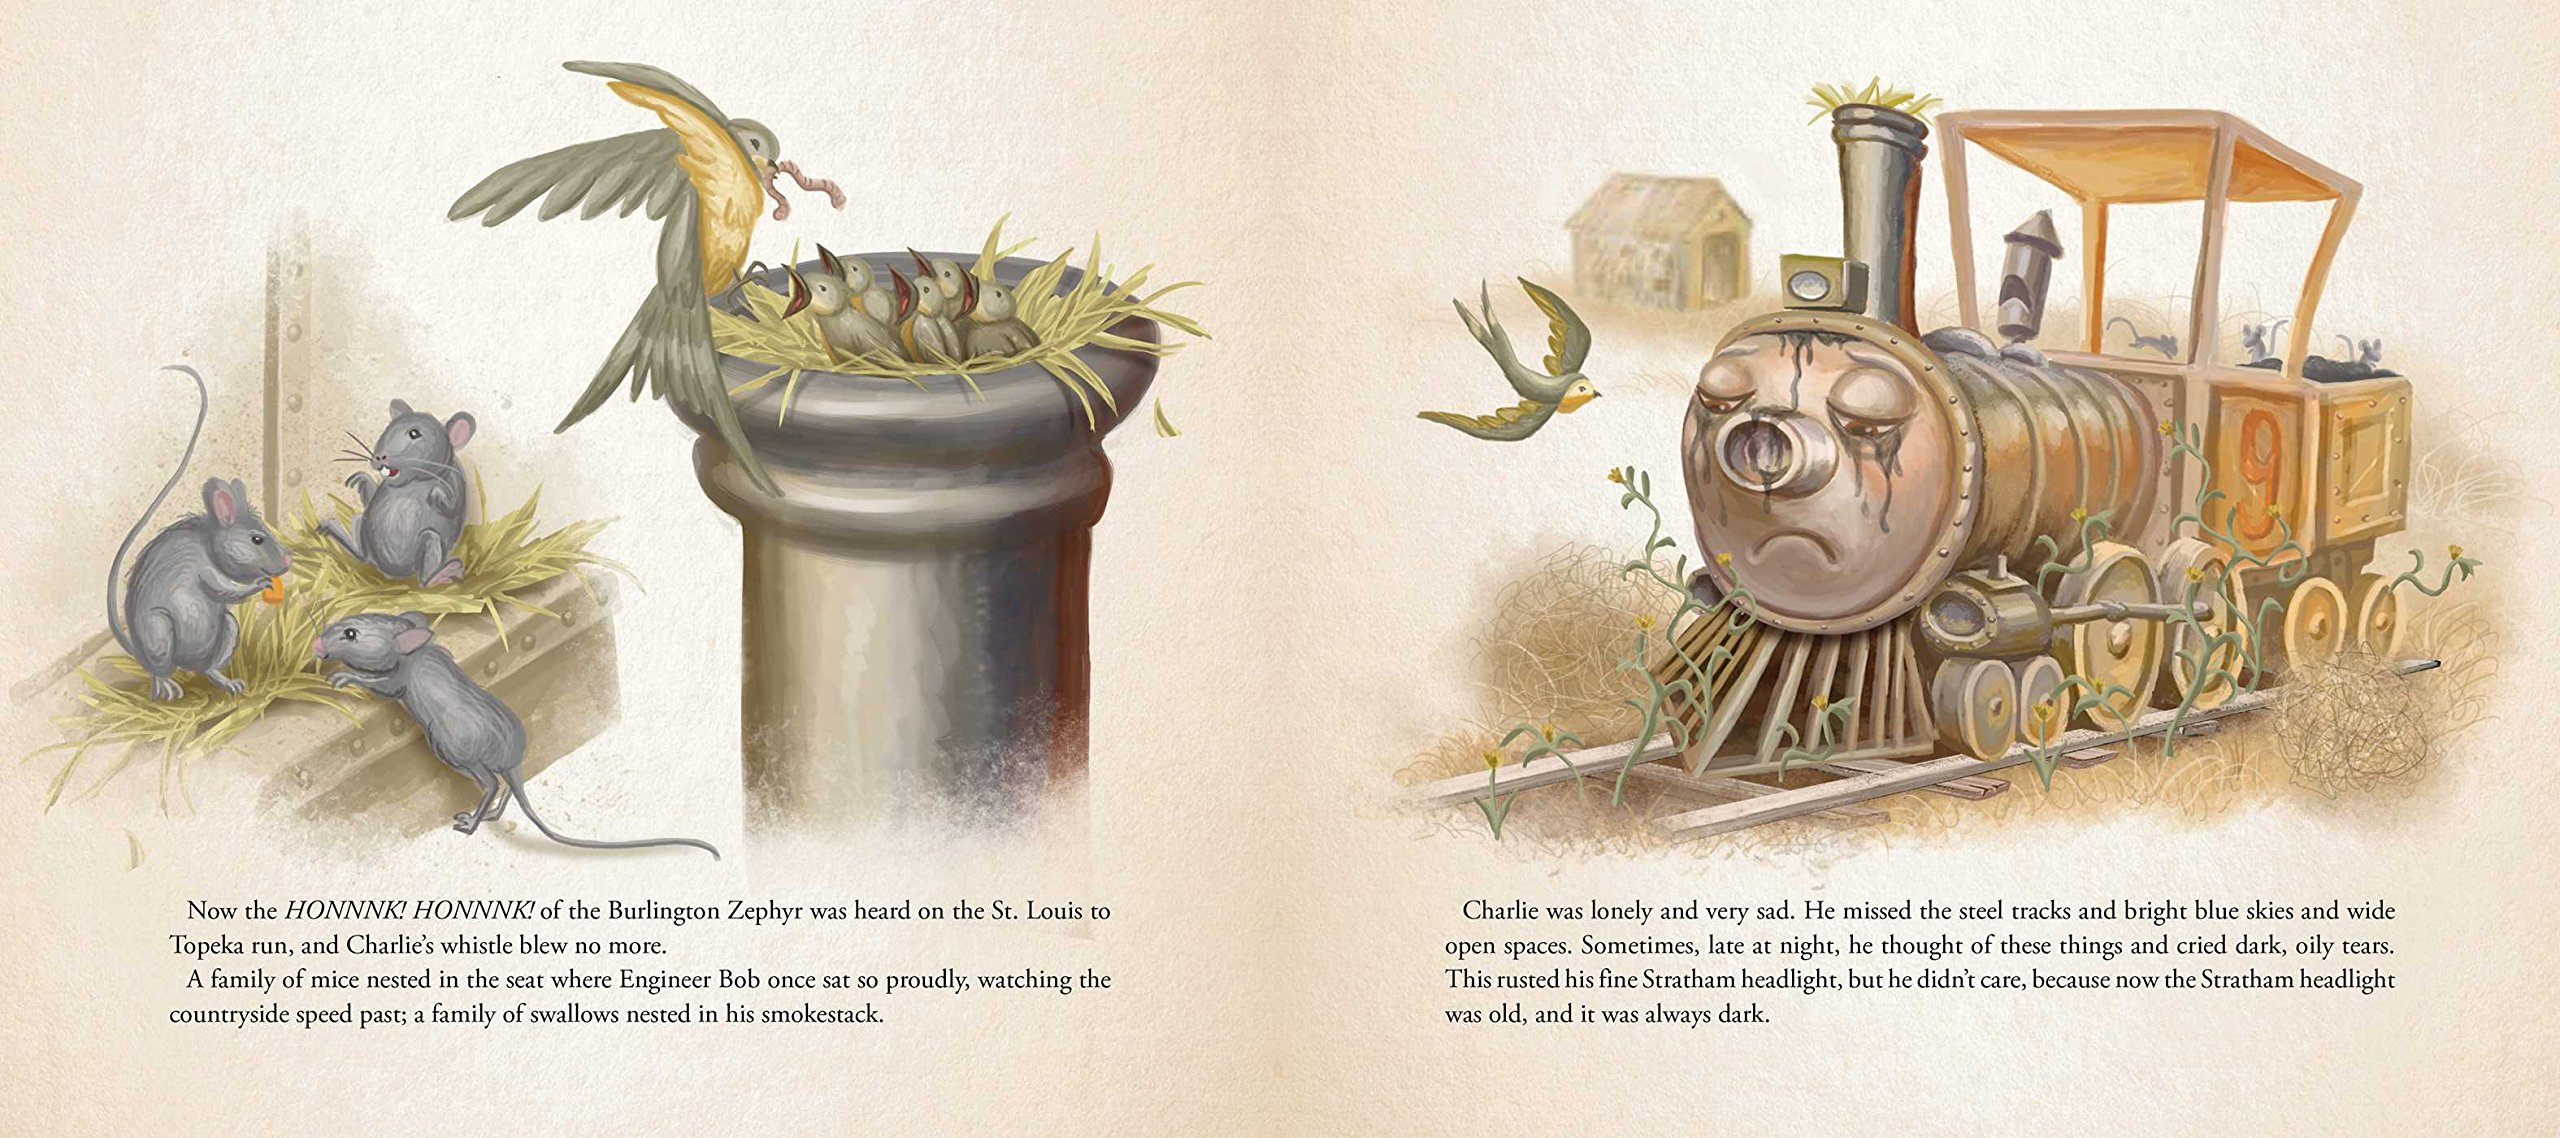 Stephen King Wrote A Horrifying Children’s Book From The Dark Tower Universe